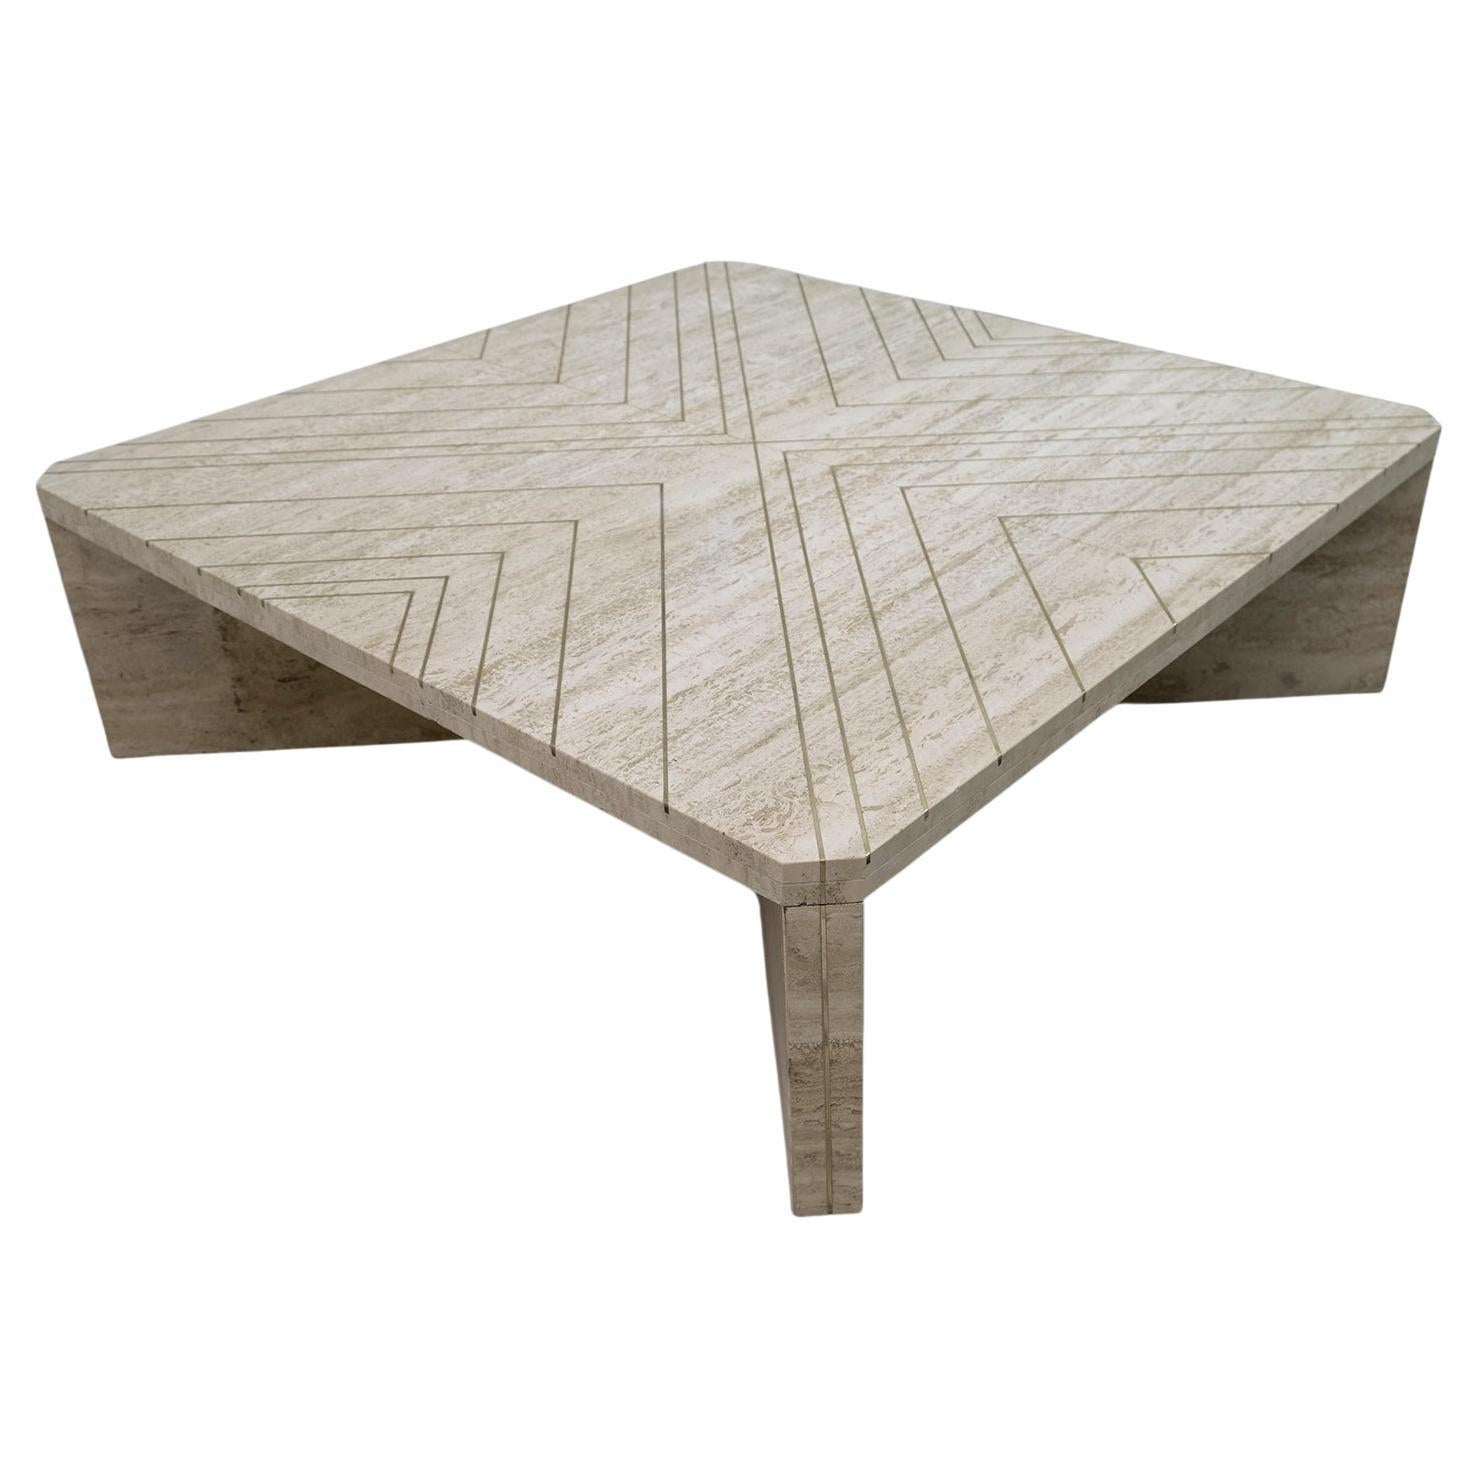 Willy Rizzo Mid-Century Italian Travertine Coffee Table with Brass Inlays, 1970s